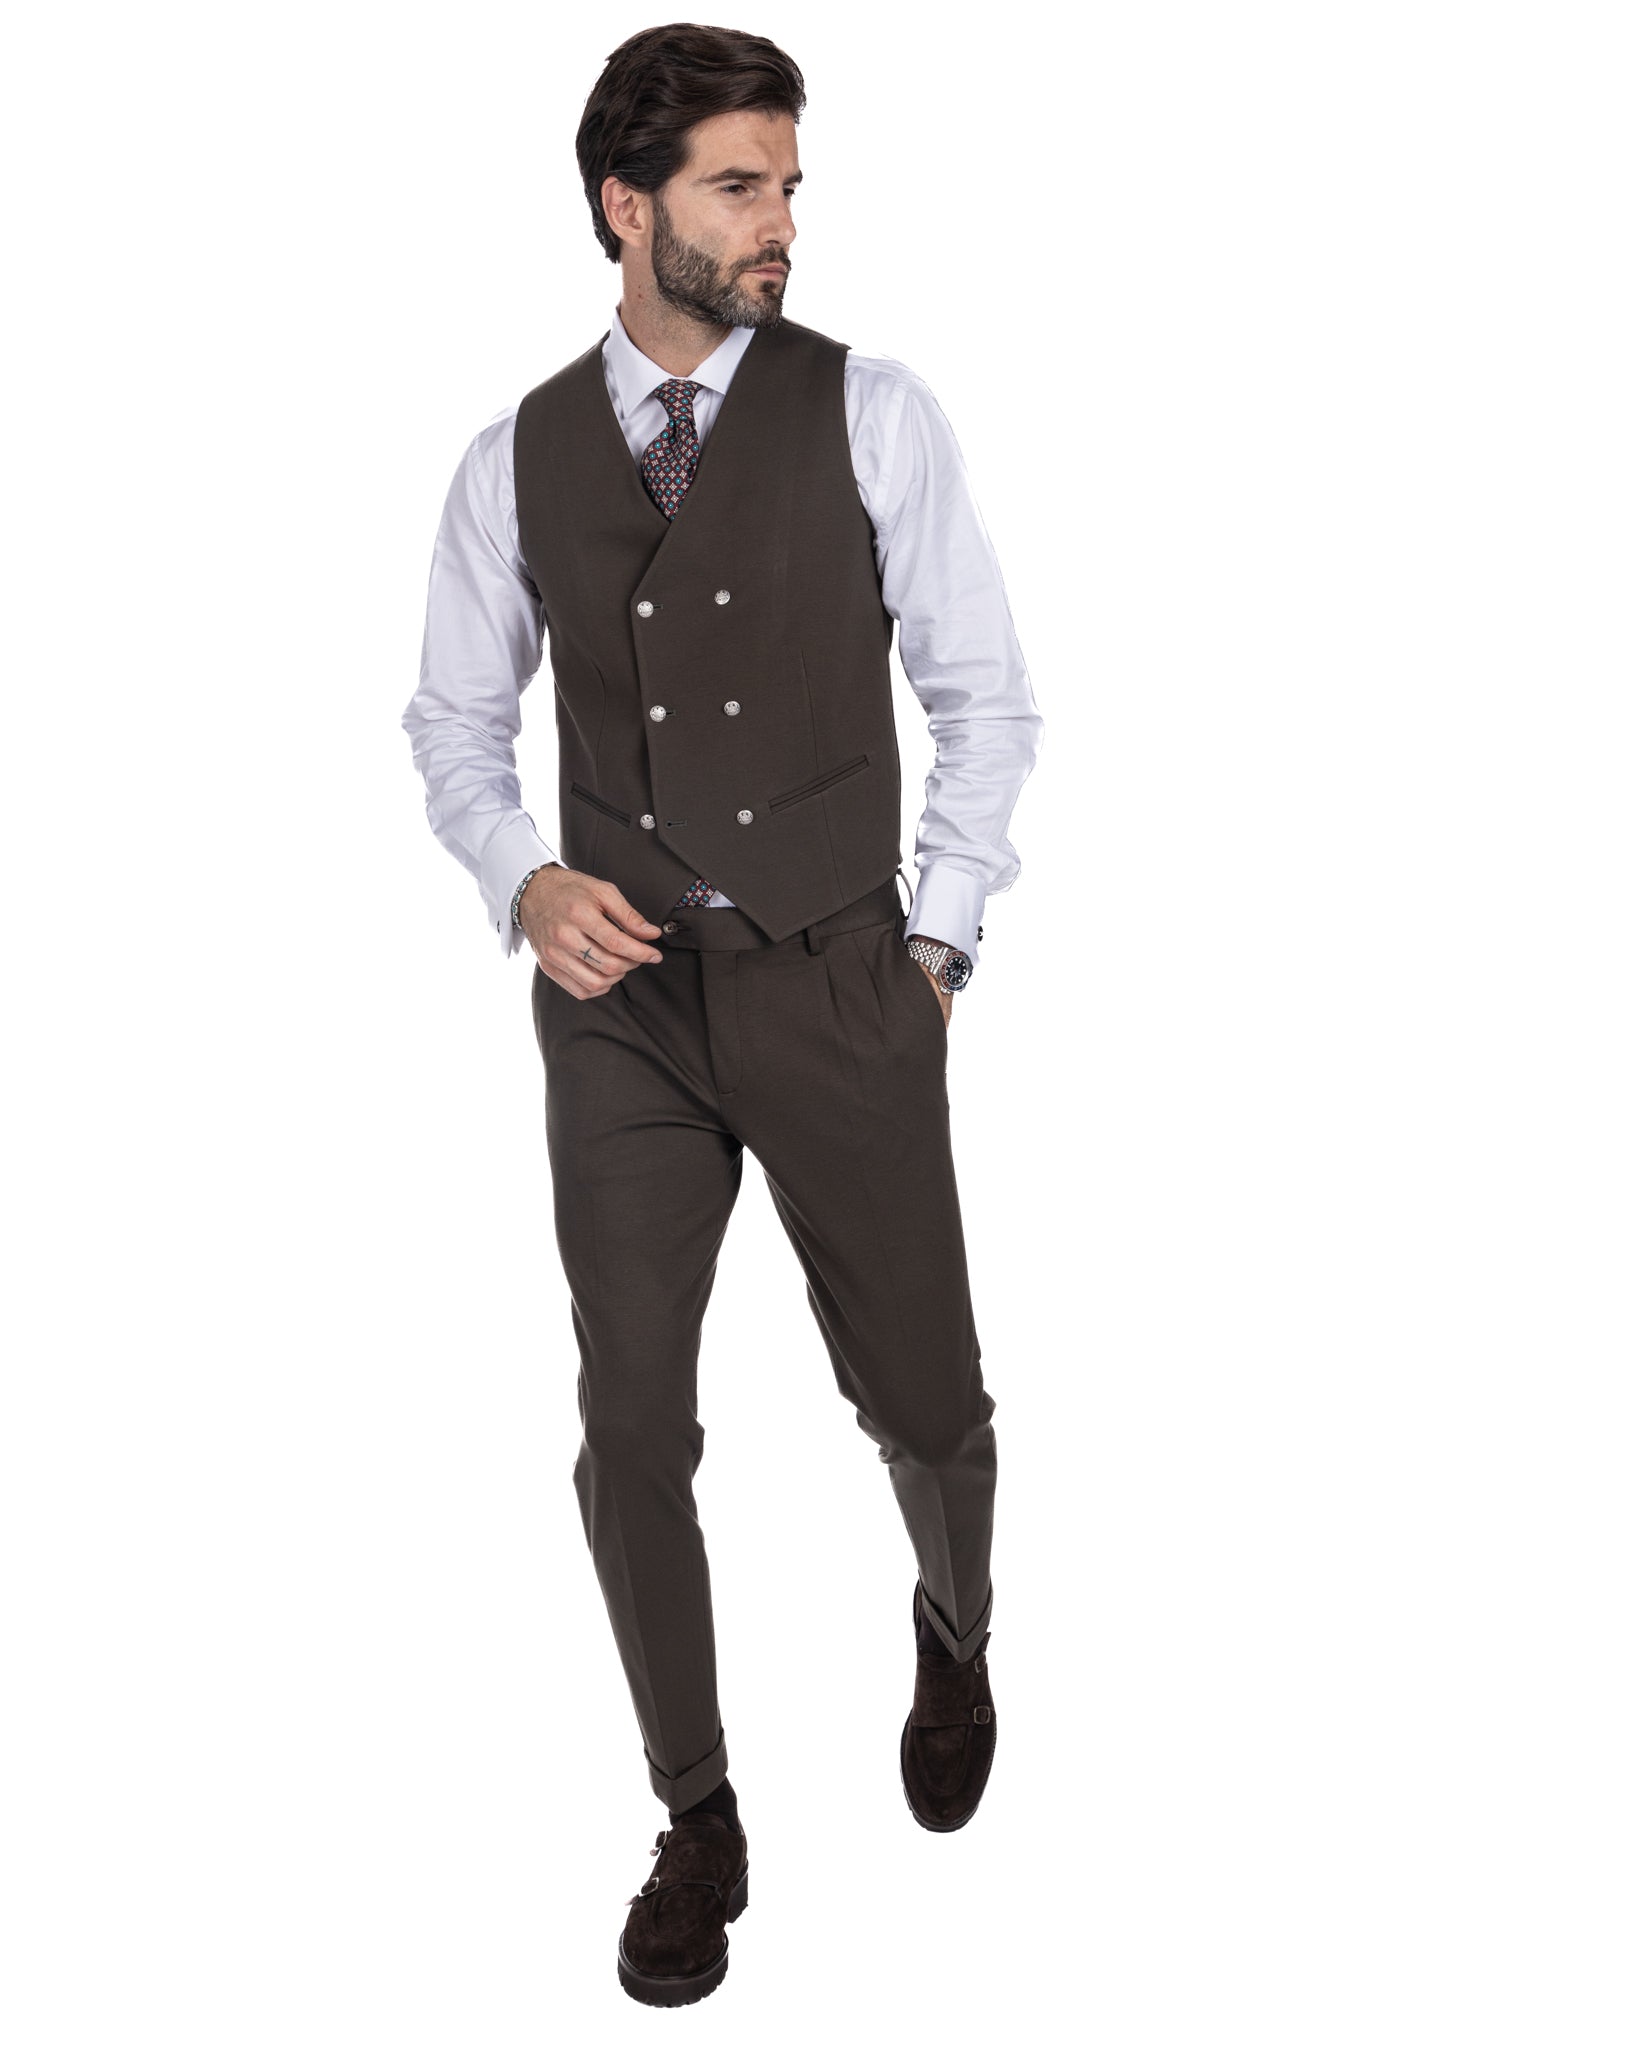 Mustang - double-breasted waistcoat in dark brown Milanese stitch